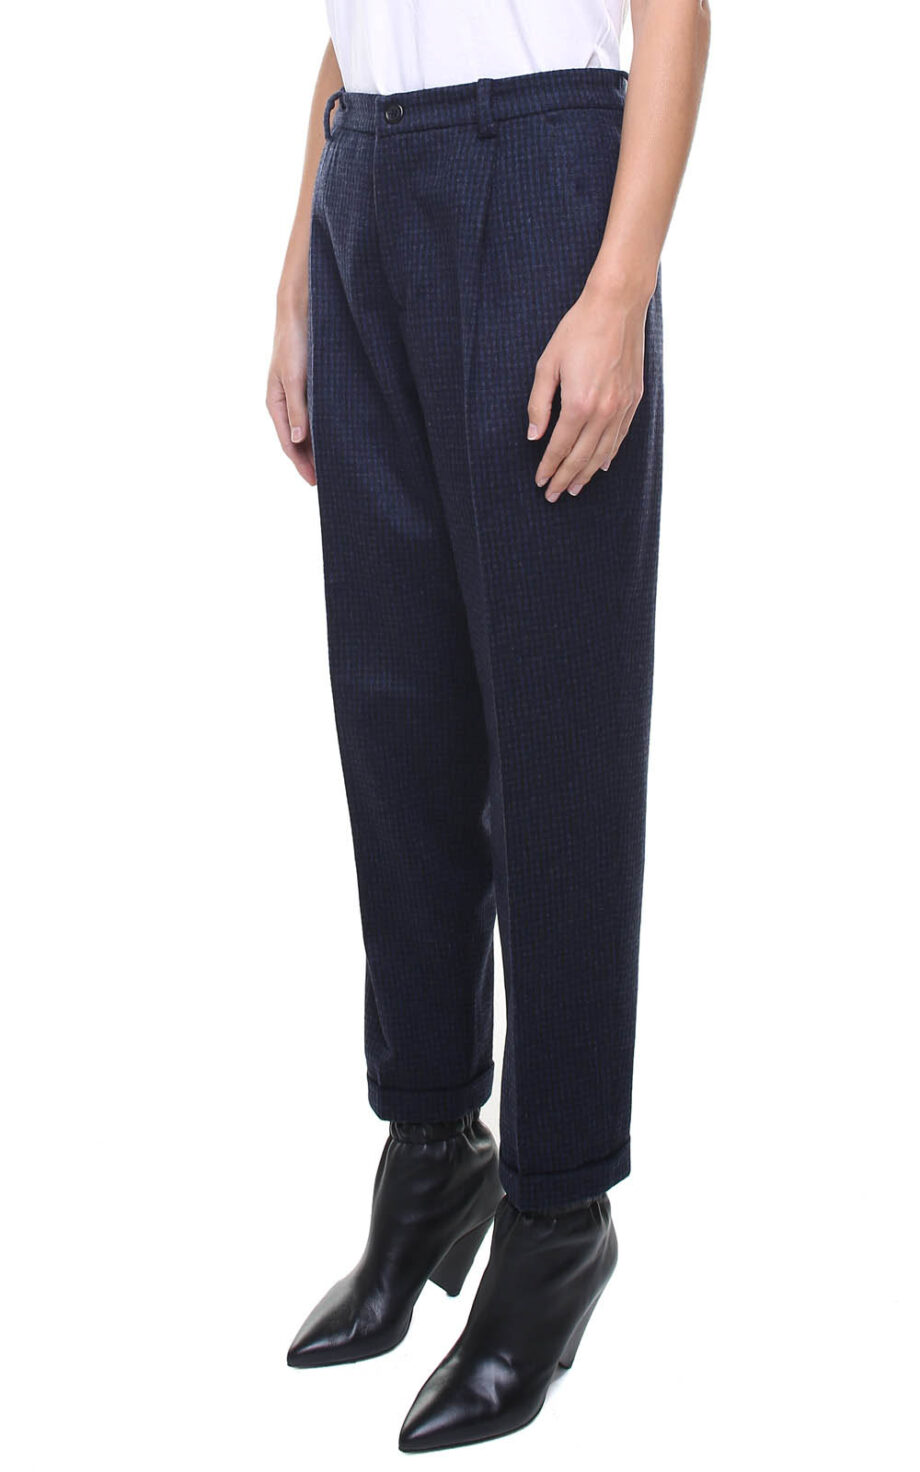 Jane trousers wool and cashmere w/ removable suspenders